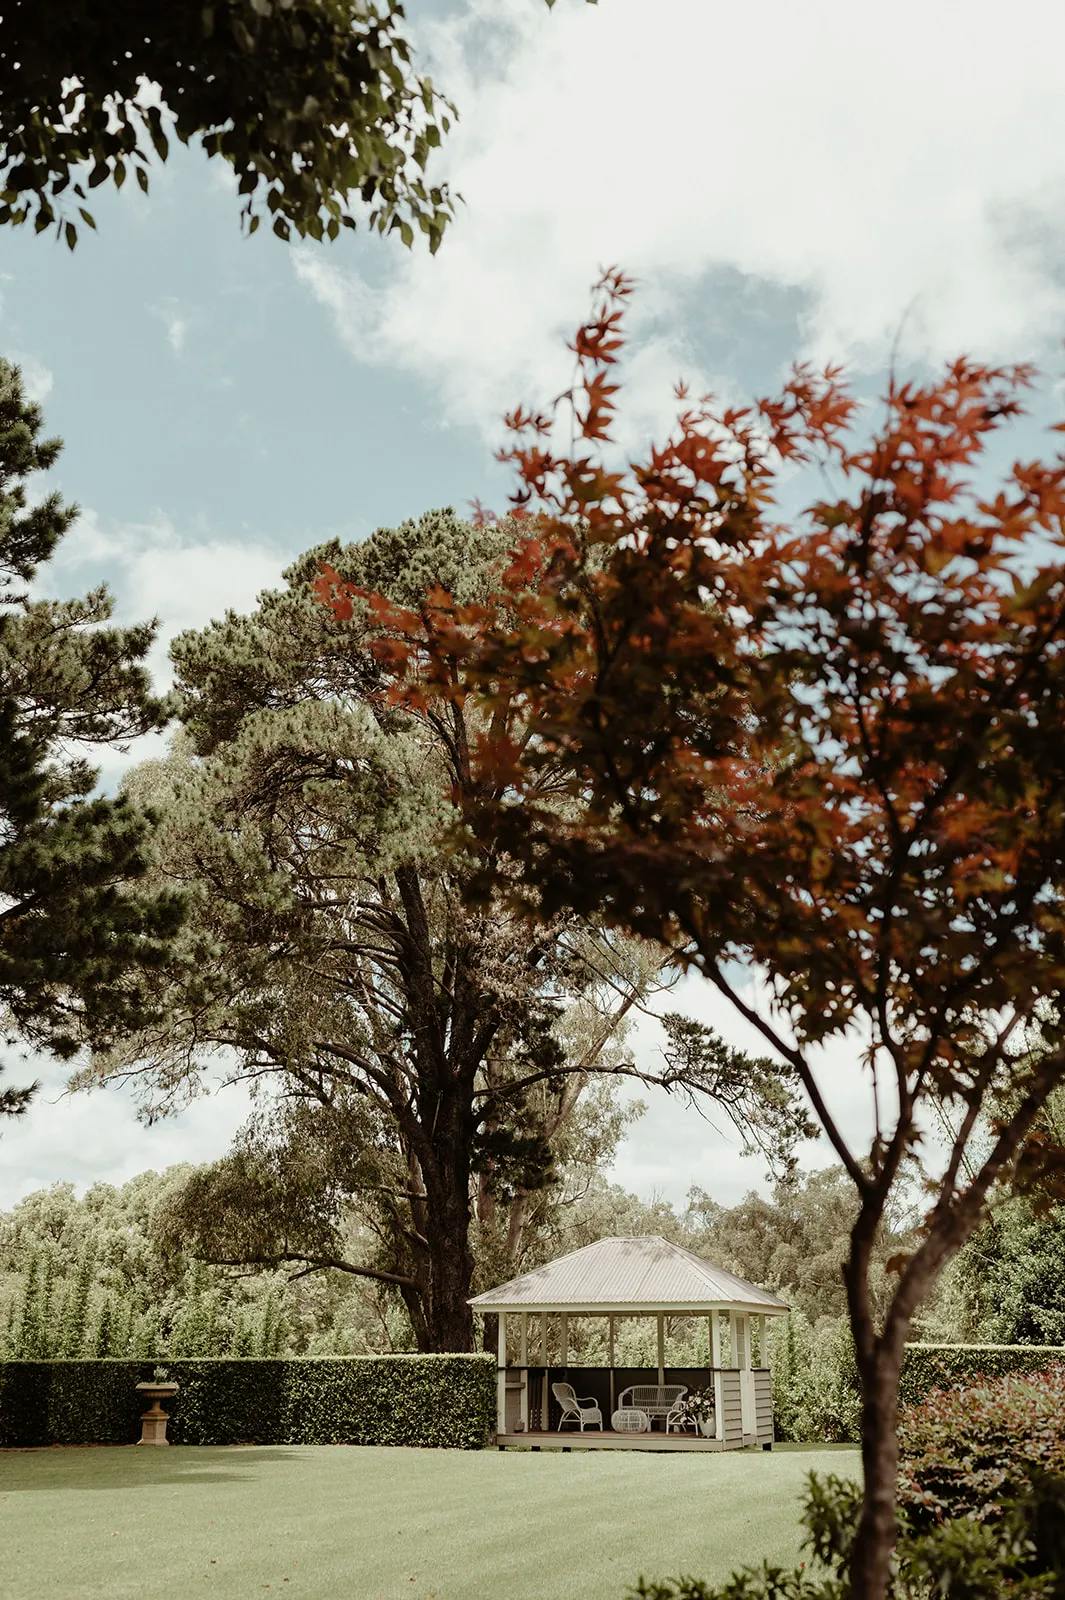 A serene garden scene featuring a white gazebo surrounded by lush greenery and tall trees. In the foreground, a tree with red leaves adds a splash of color. The sky is partly cloudy, casting dappled light on the peaceful landscape.